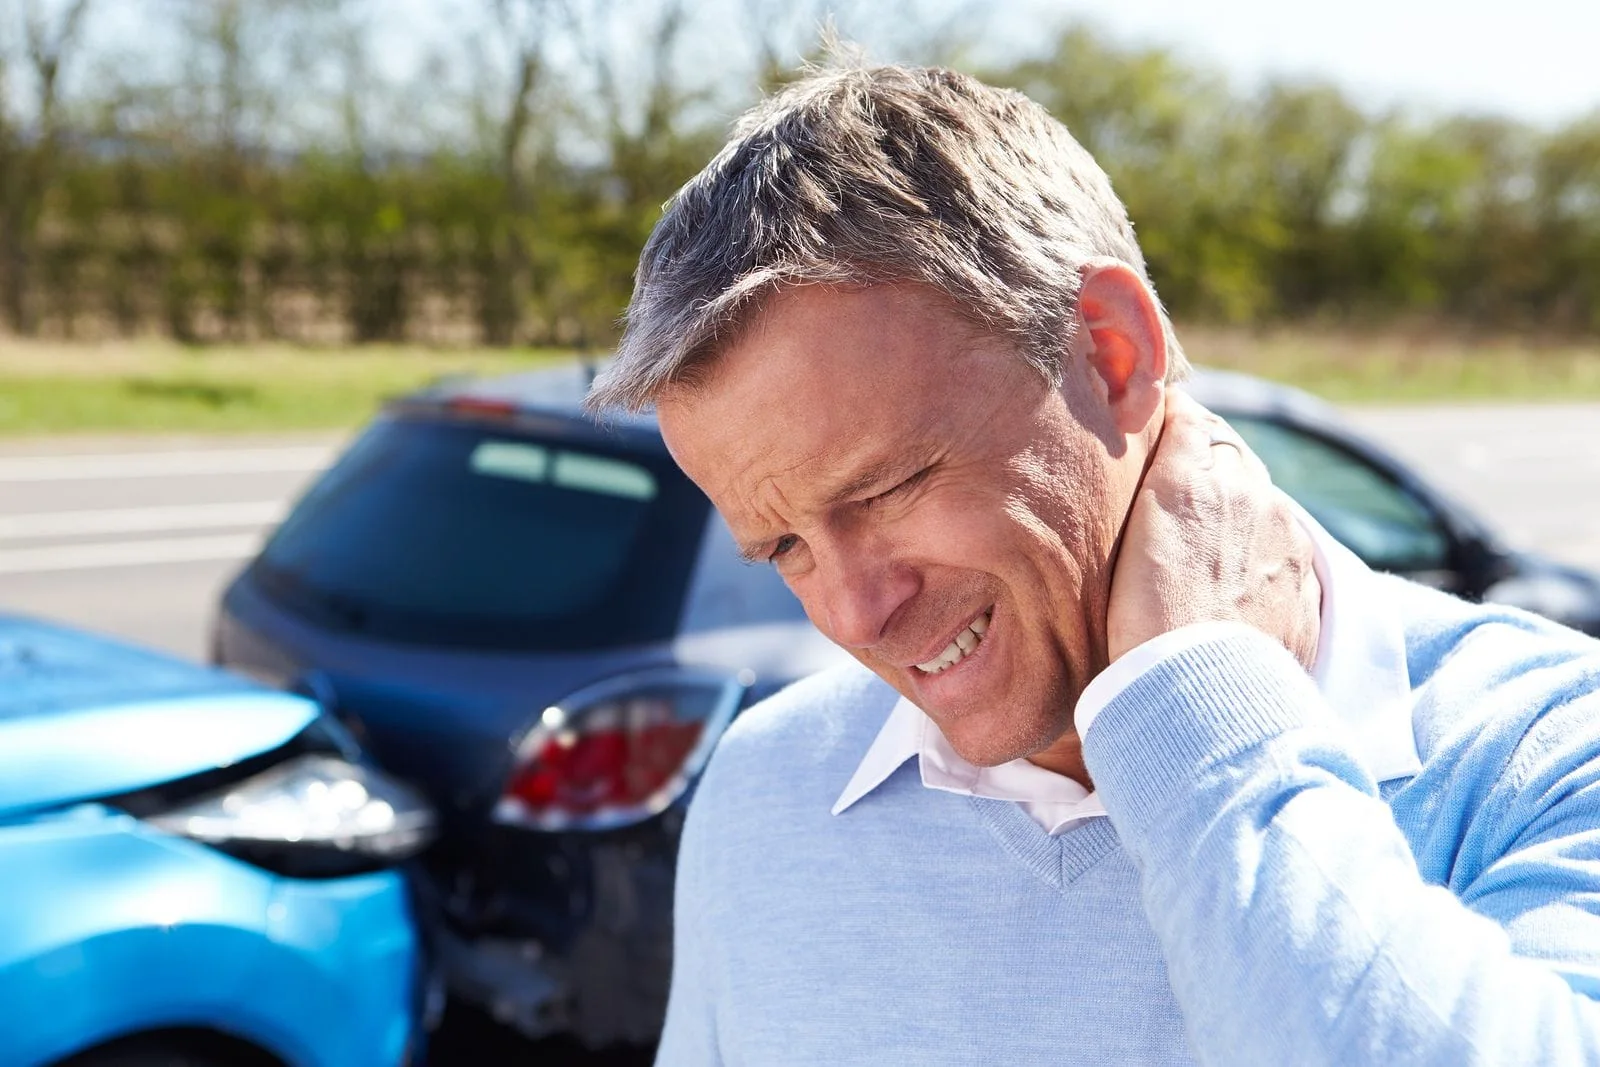 auto accident injury and whiplash treatment from your chiropractor in houma and thibodaux